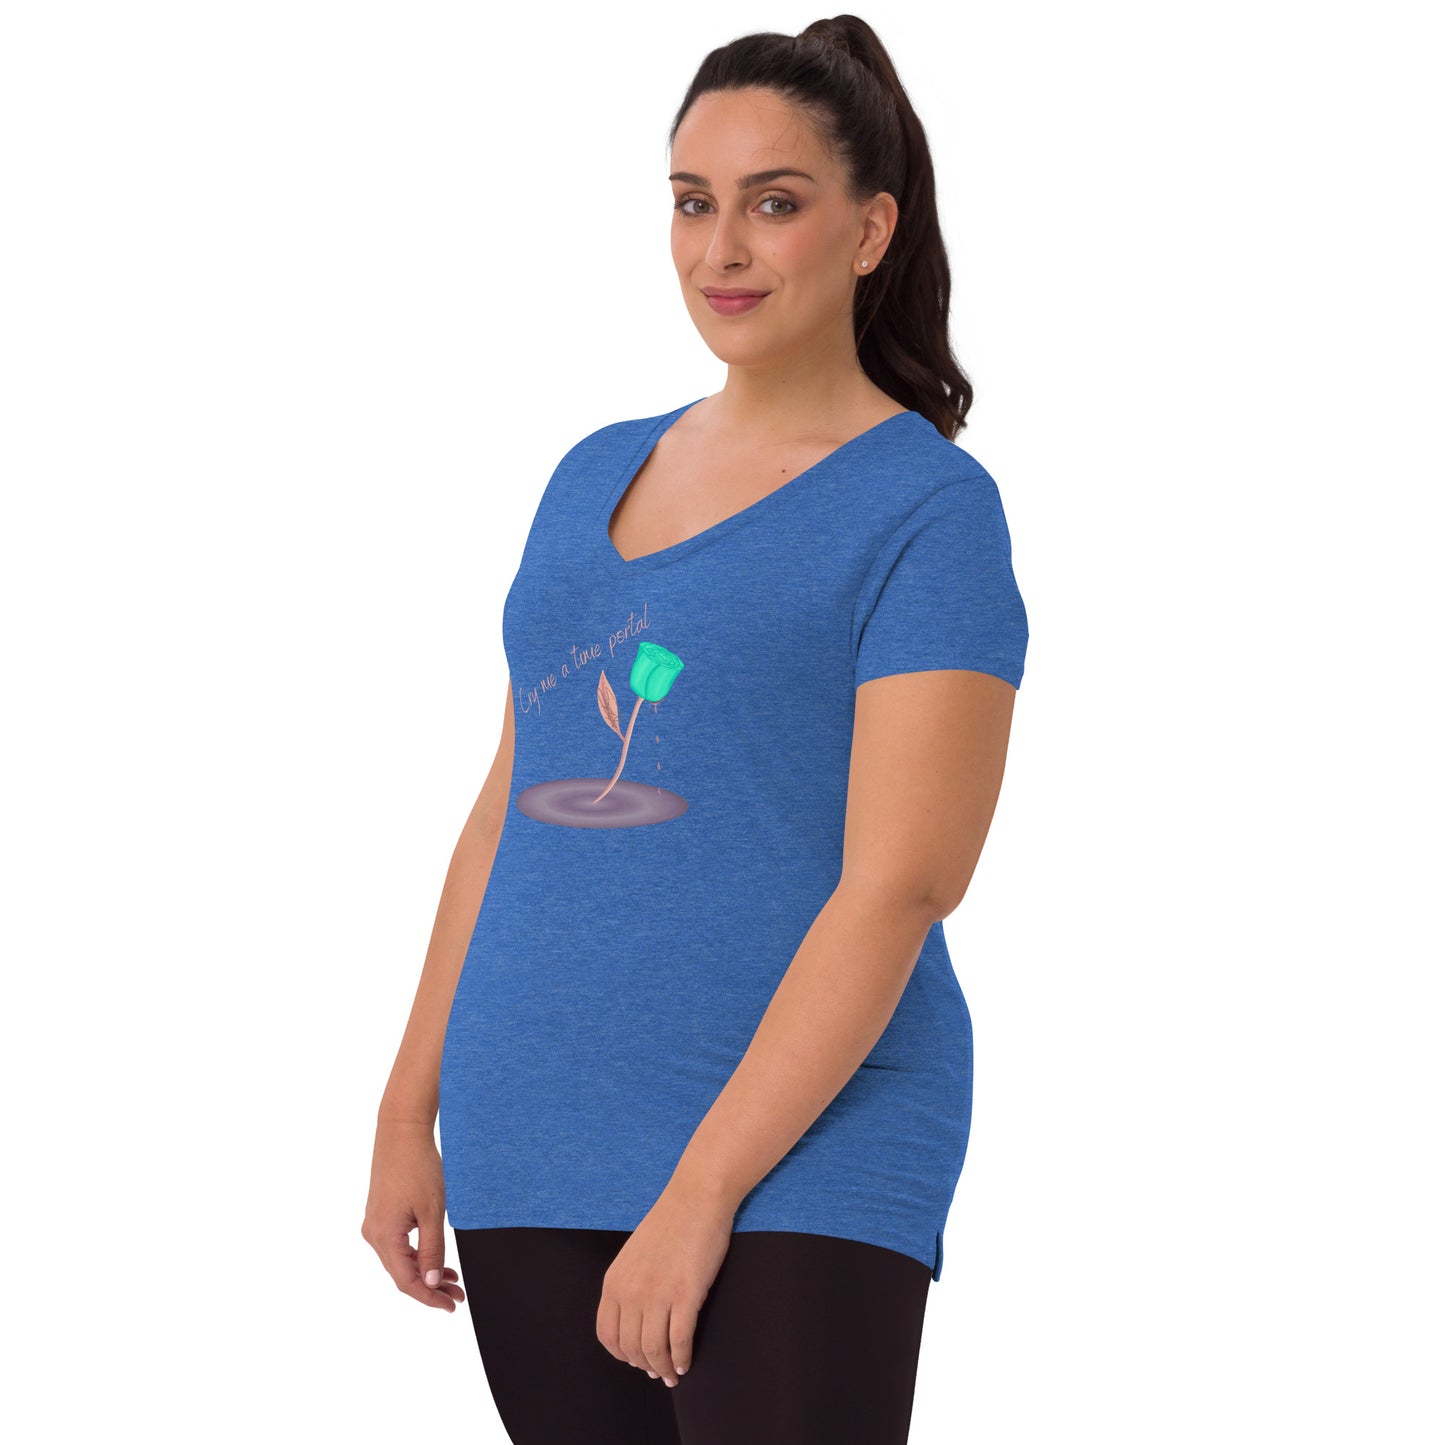 Cry me a time portal - Women’s recycled V-neck t-shirt